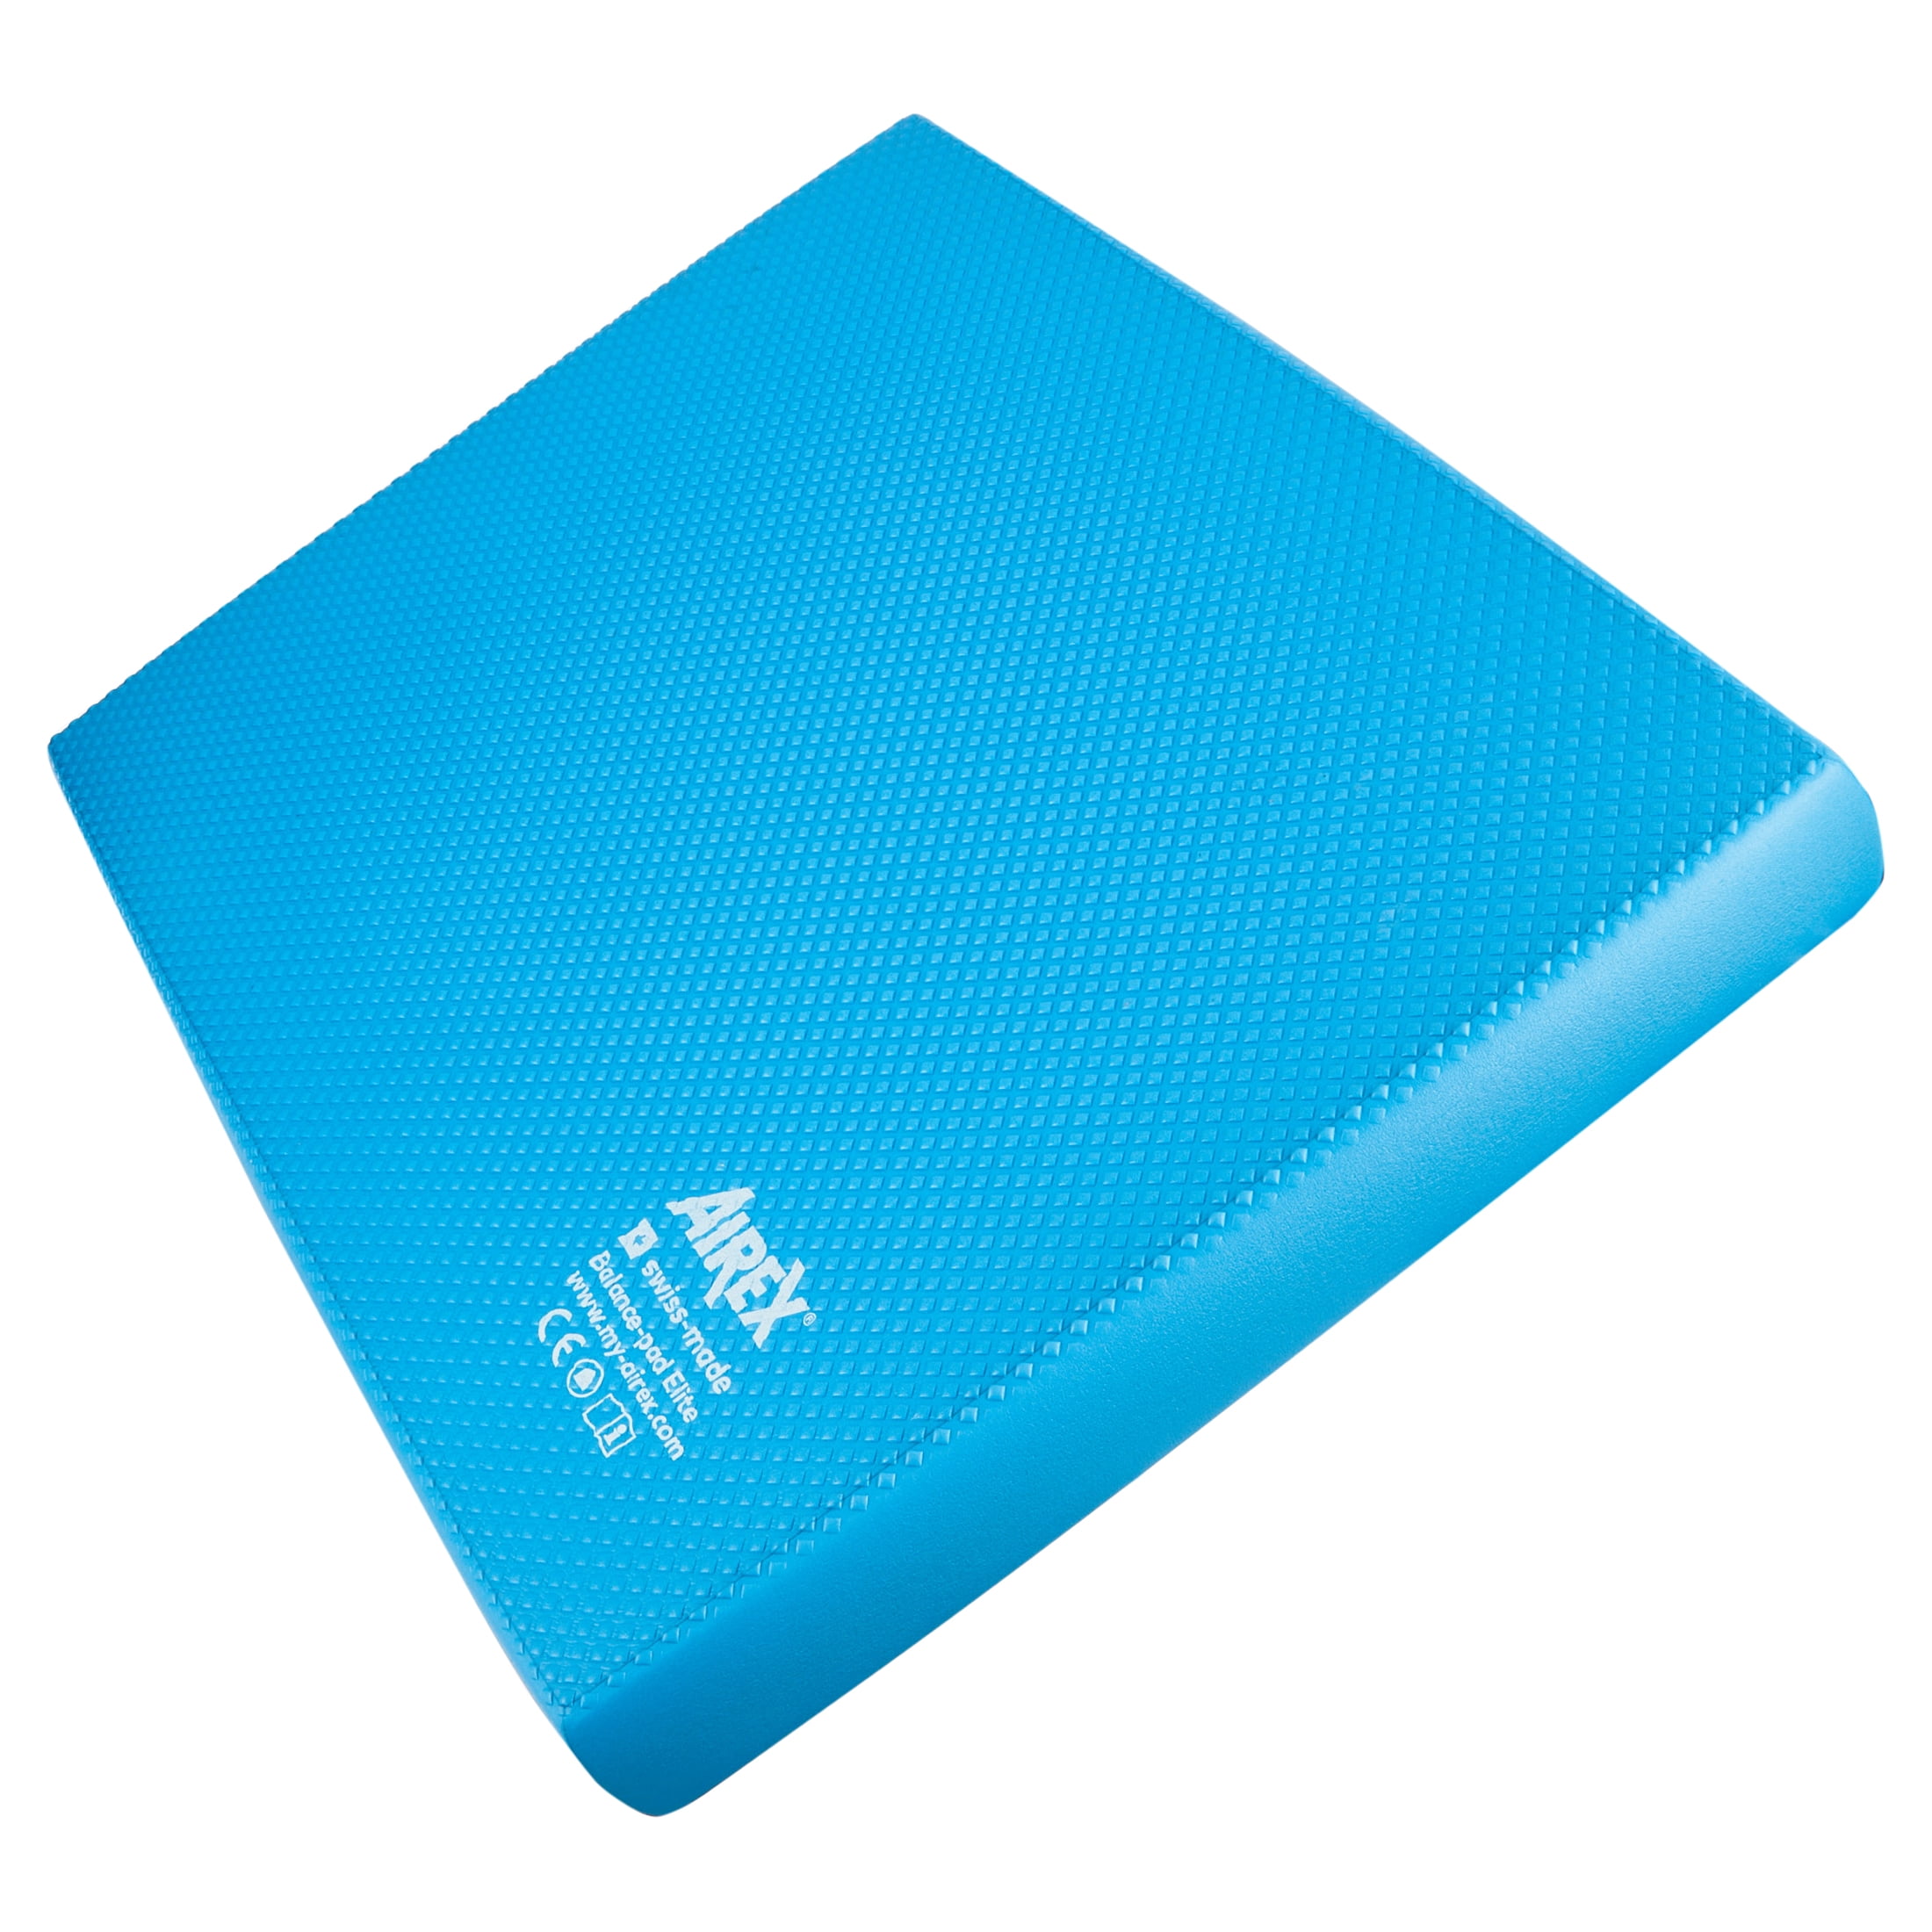 Airex Balance Pad - Exercise Foam Pad Physical Therapy, Workout